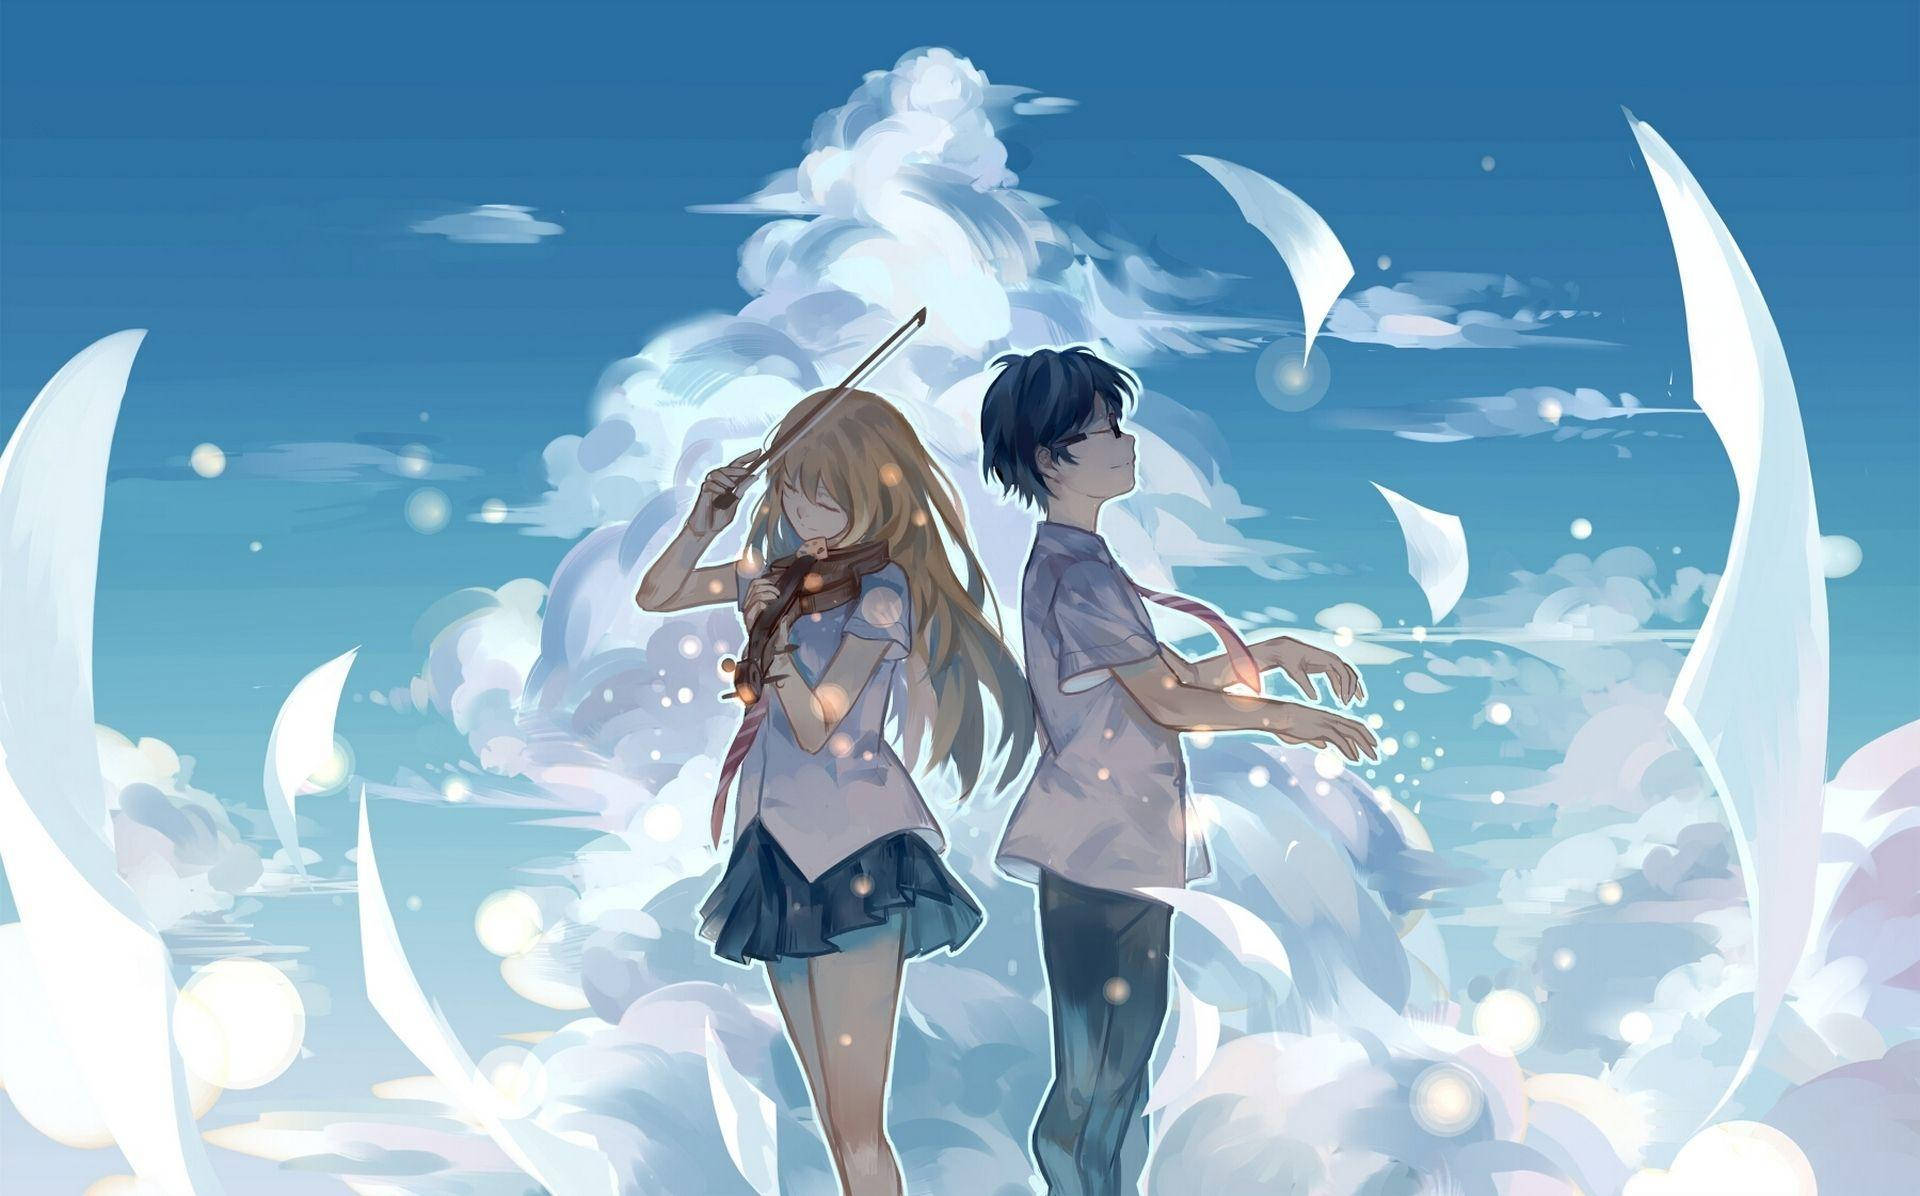 Top 999+ Your Lie In April Wallpapers Full HD, 4K✅Free to Use